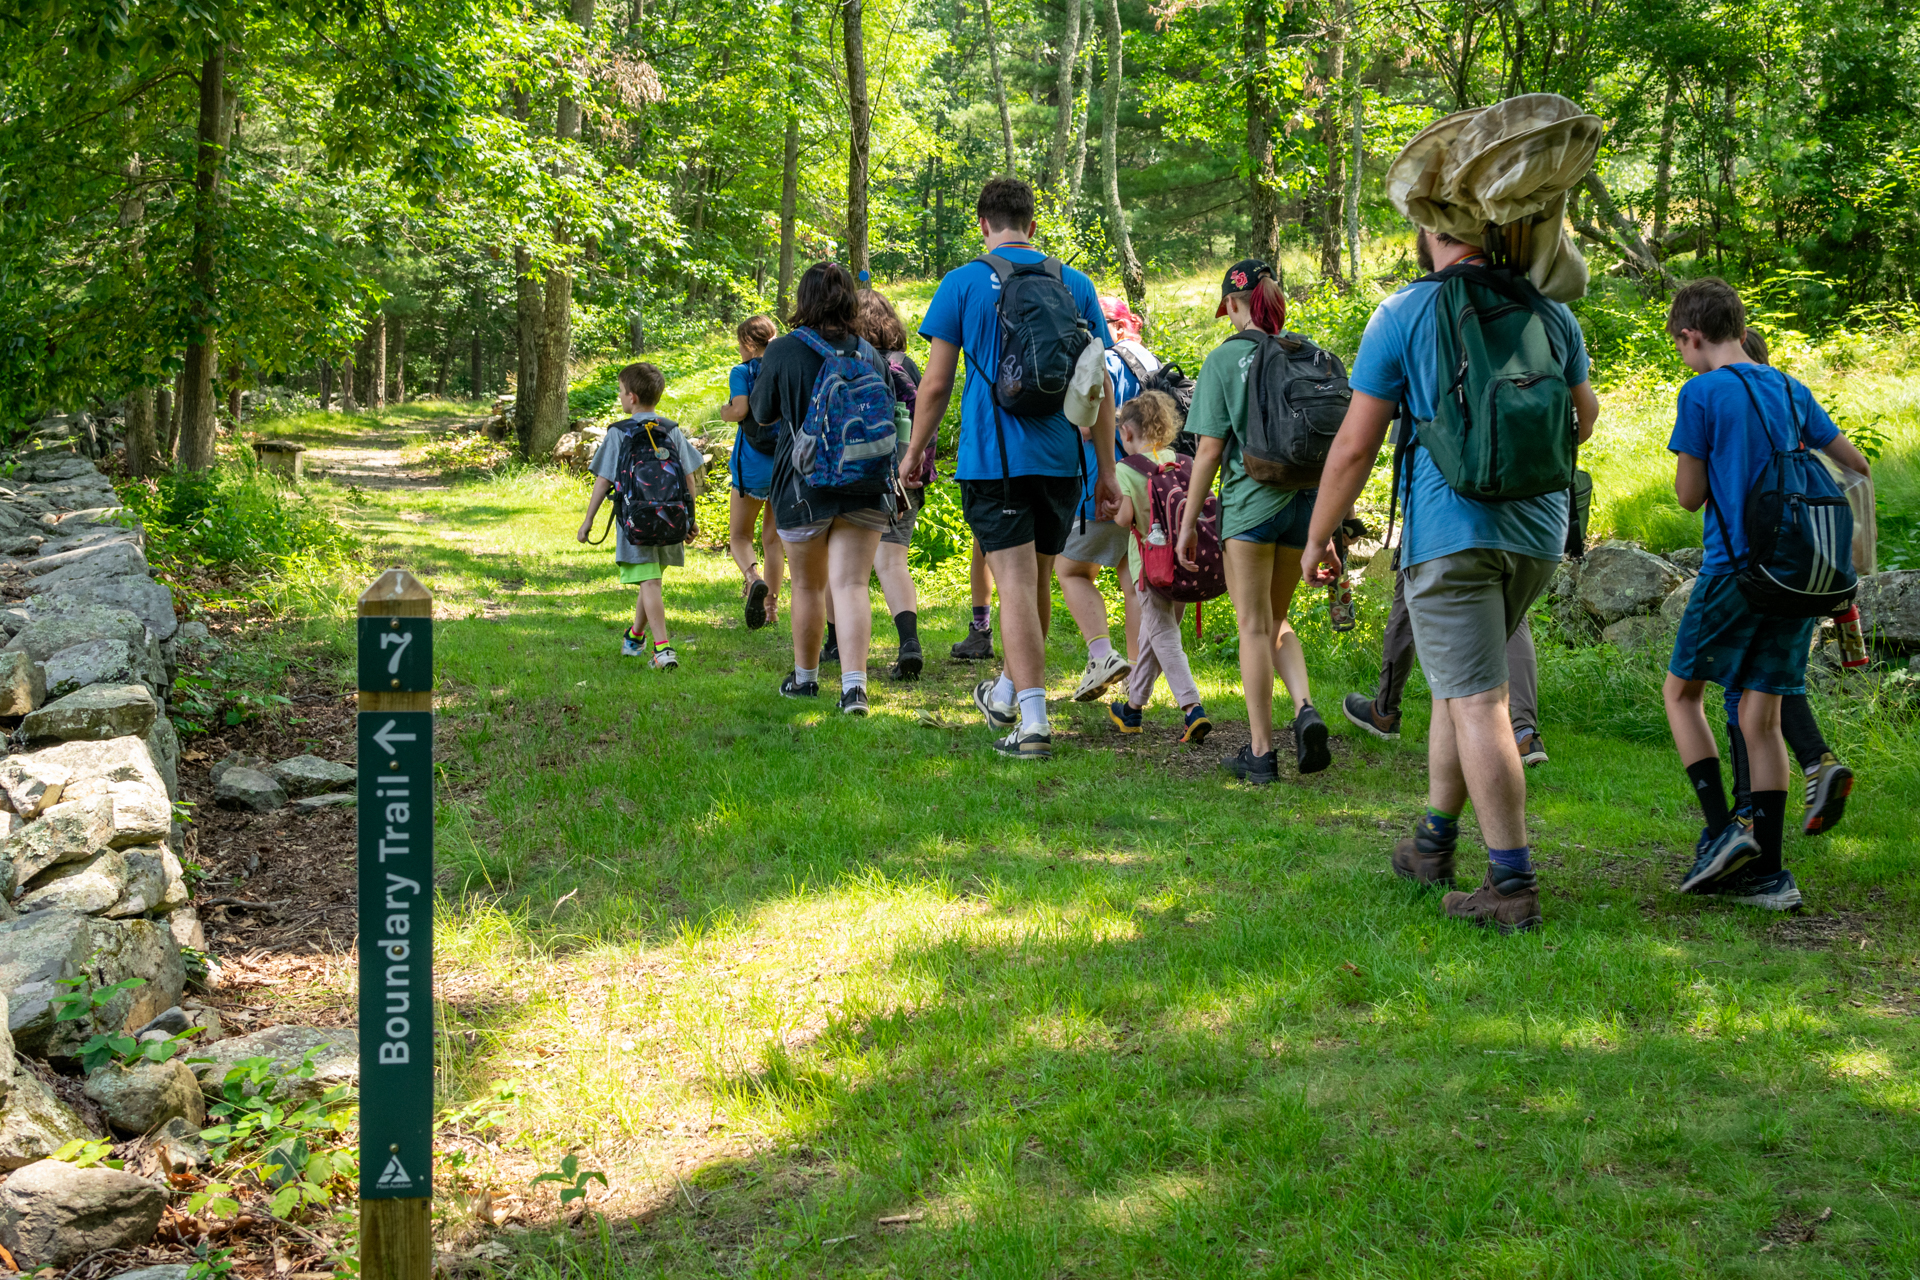 A group of Broadmoor campers and counselors walks along a shady, grassy trail in the woods. A stone wall runs along the left side and there is a trail sign in the foreground that reads, "Boundary Trail"